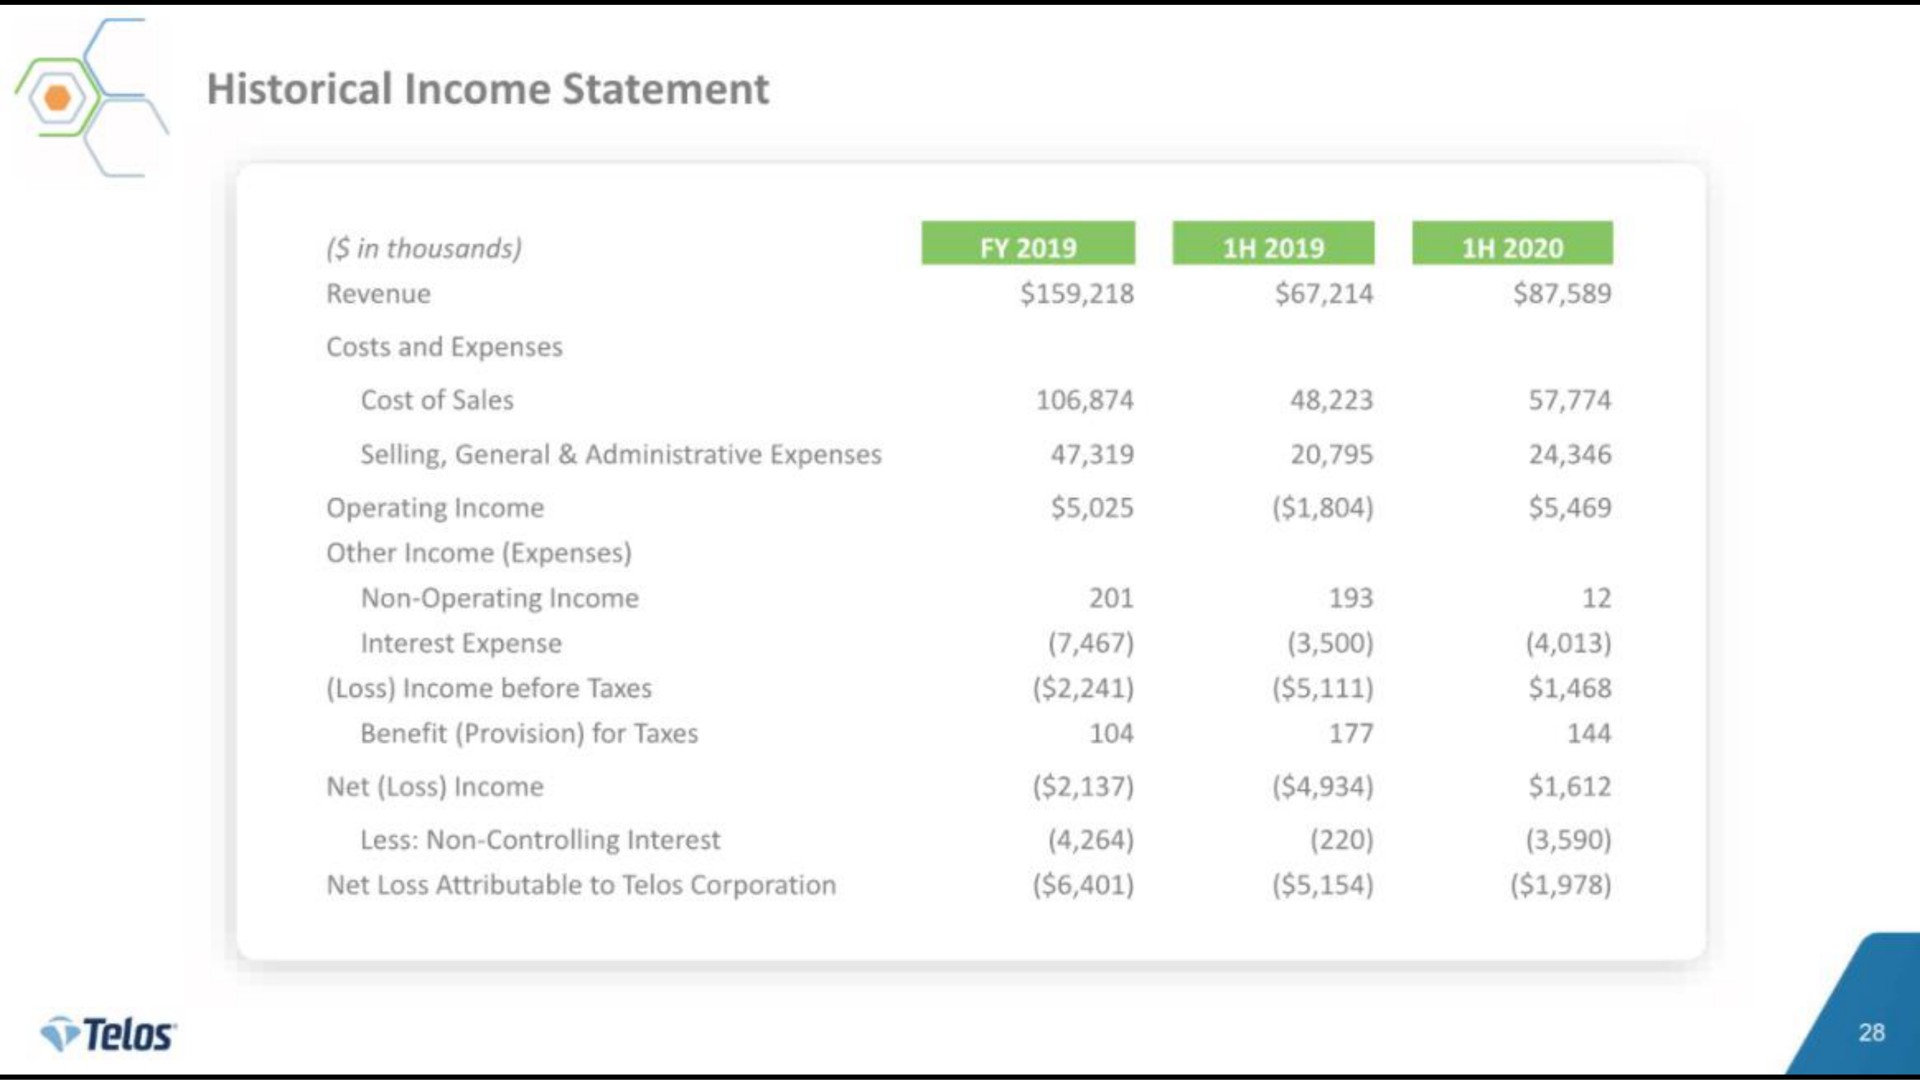 historical income statement in thousands | Telos